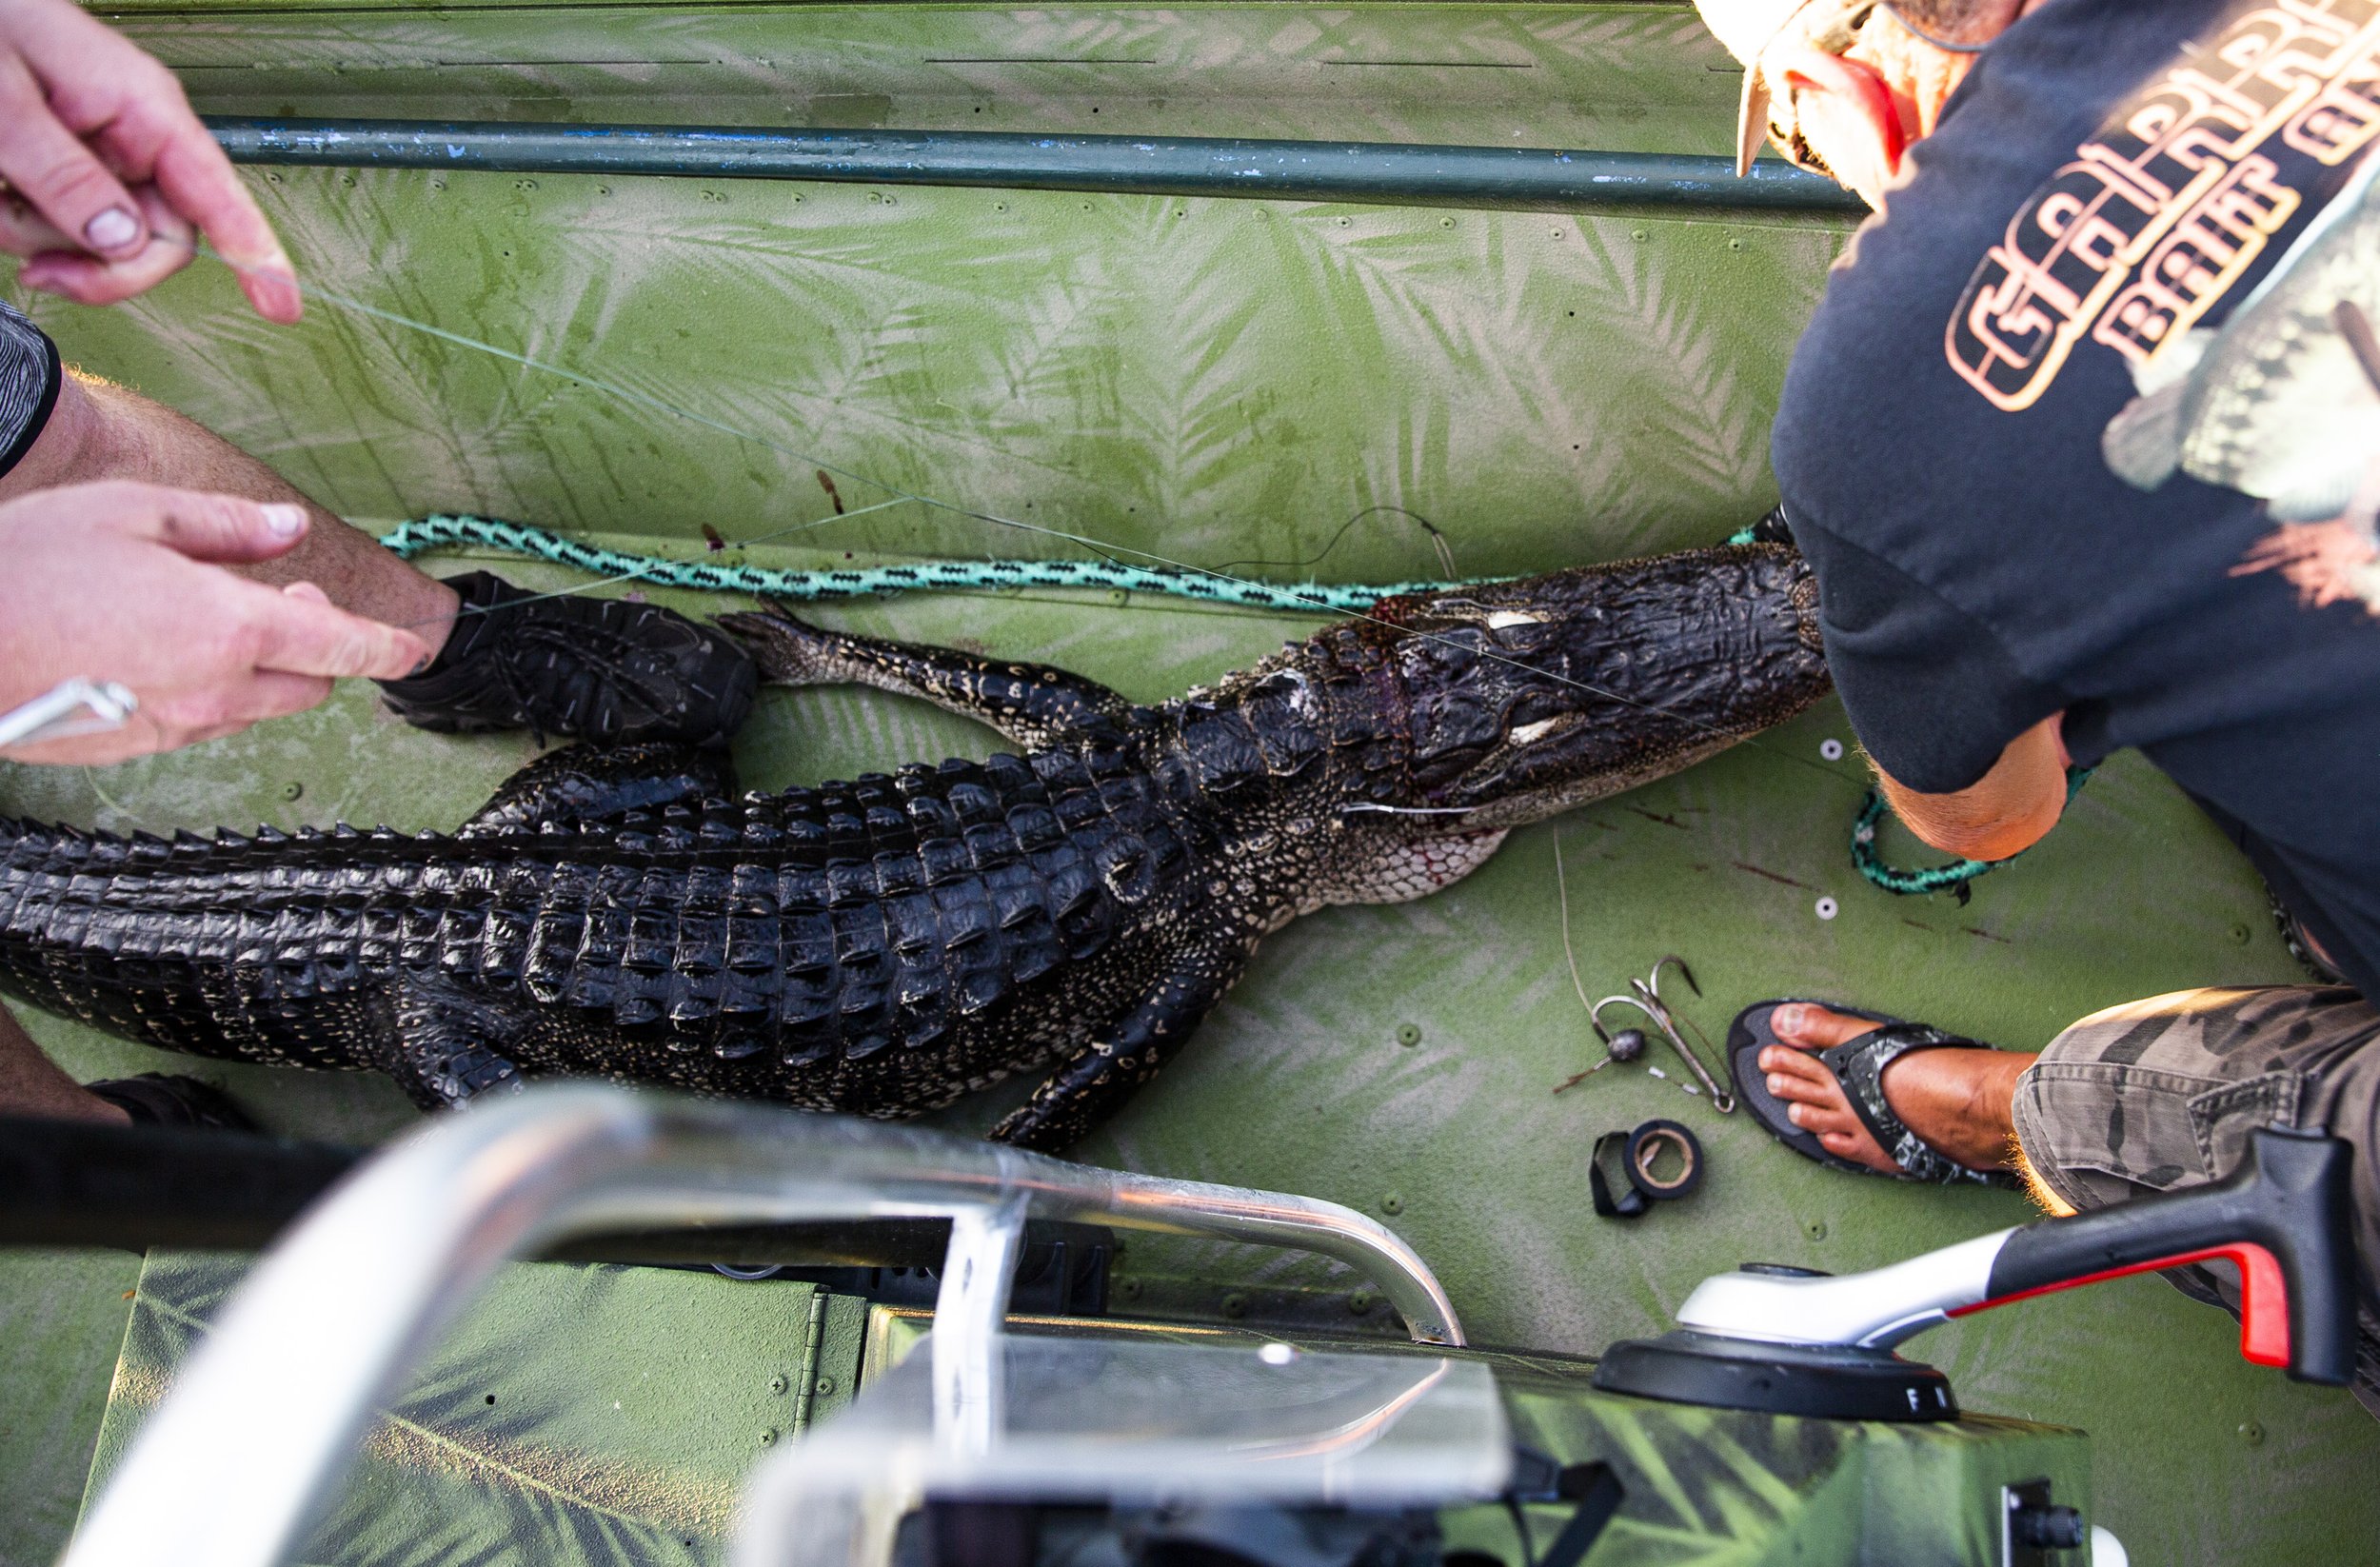  Capt. Bob Stafford works to measure and tag an alligator during a hunt with Okeechobee Charters on Lake Okeechobee Friday, Sept. 27, 2019. 